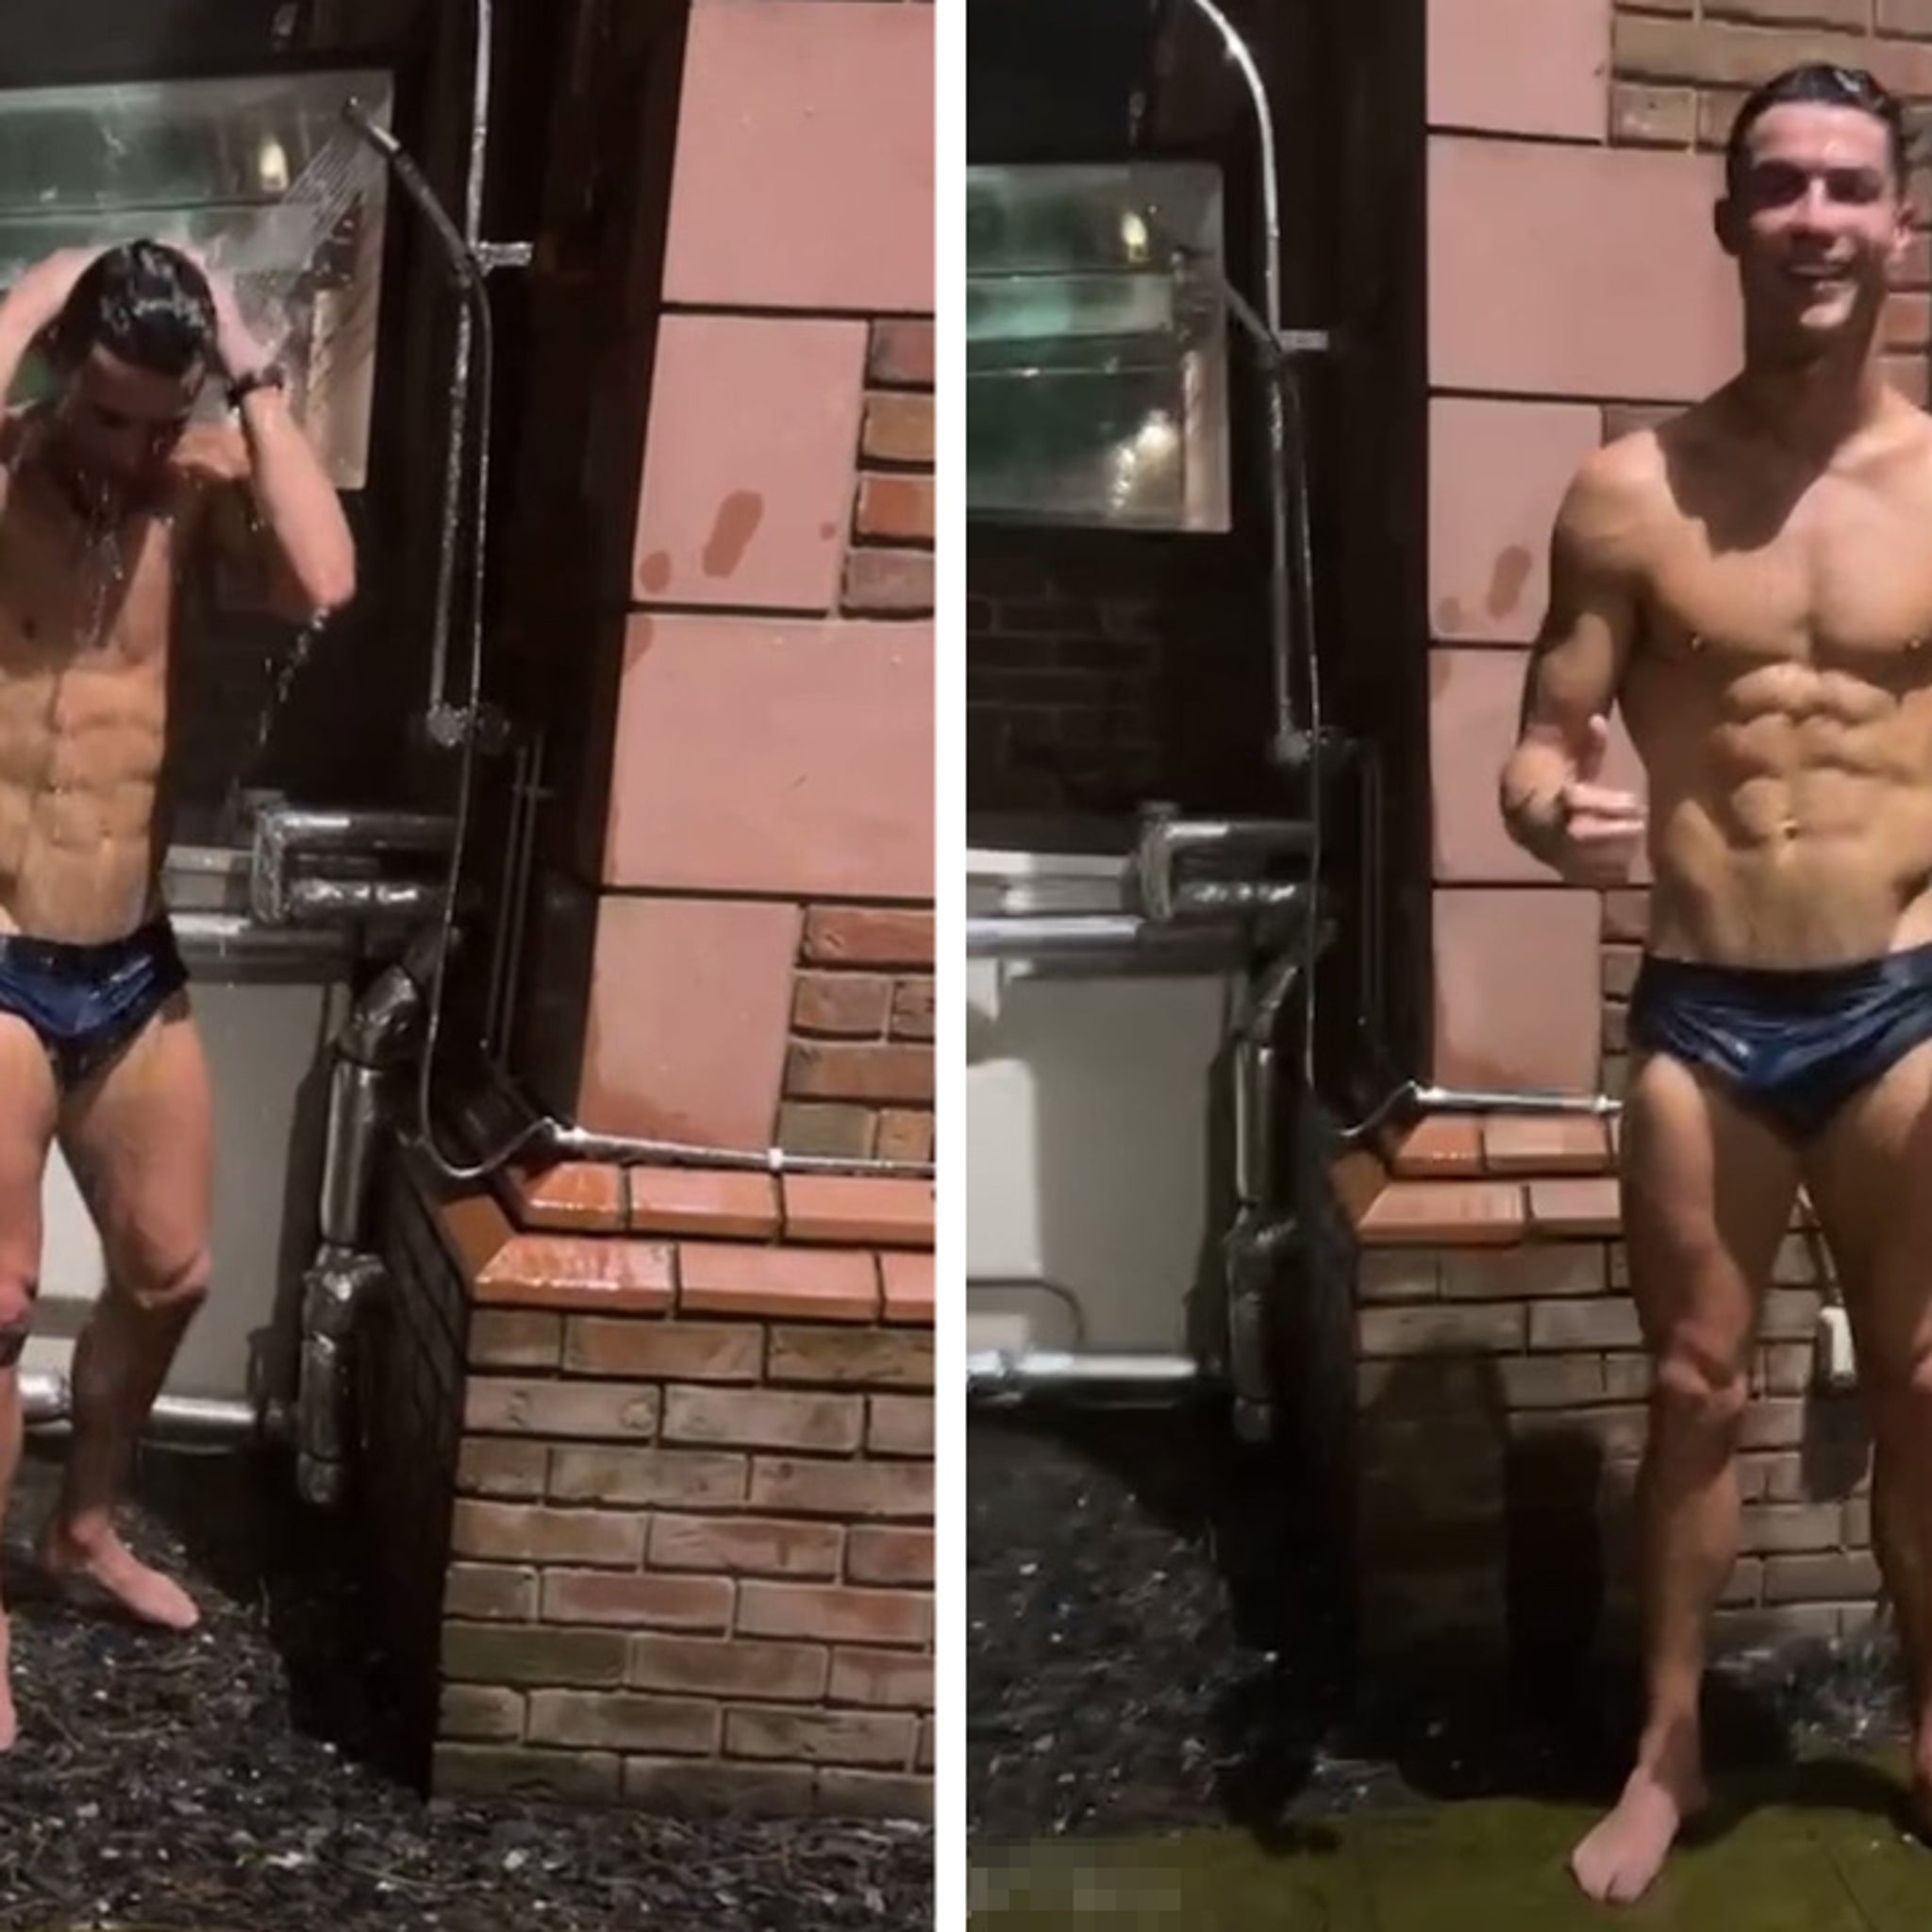 Cristiano Ronaldo Takes Shower On IG Live, 670,000 People Tune In